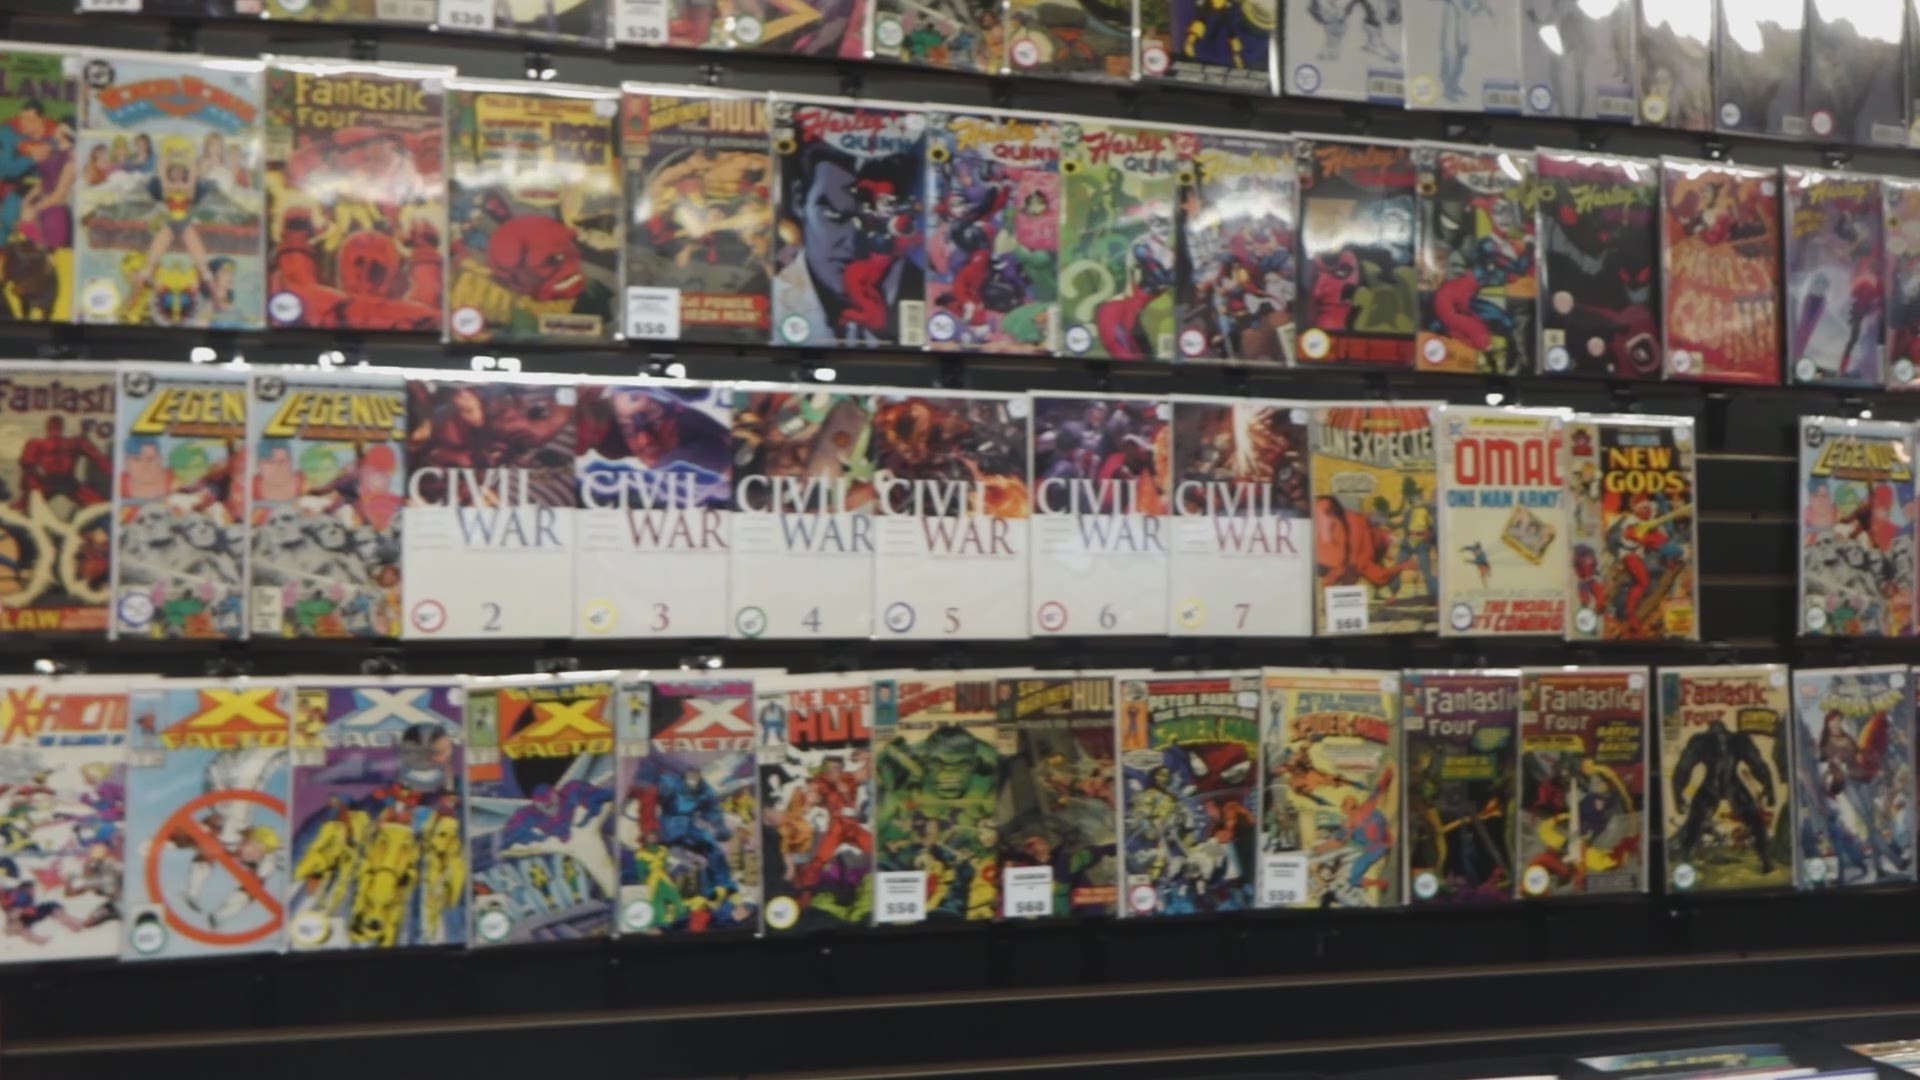 Jonathan Sanders is surrounded by superheroes every day at Coliseum of Comics in Jacksonville, but it was a real-life superhero that had the biggest impact on him.